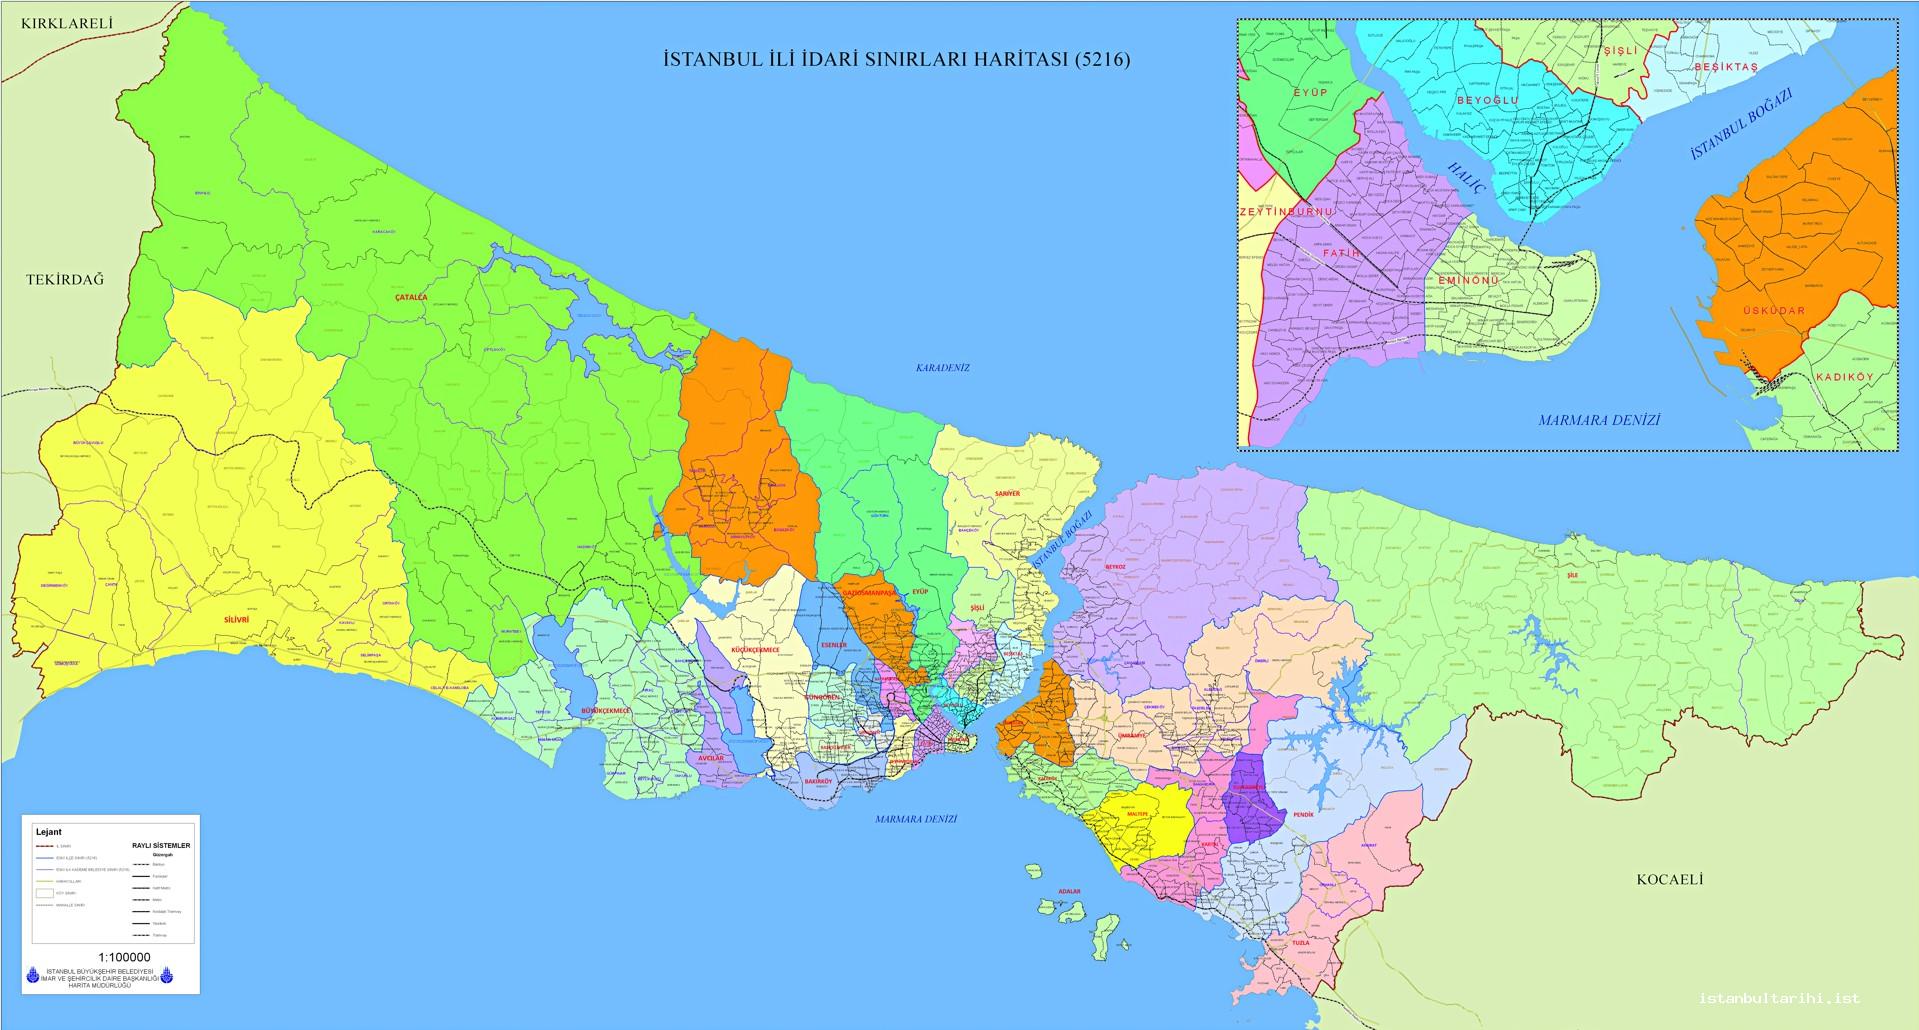 Map 5- The areas of responsibility of Istanbul Metropolitan Municipality between 2004-2008 according to Law no. 5216 (Istanbul Metropolitan Municipality)